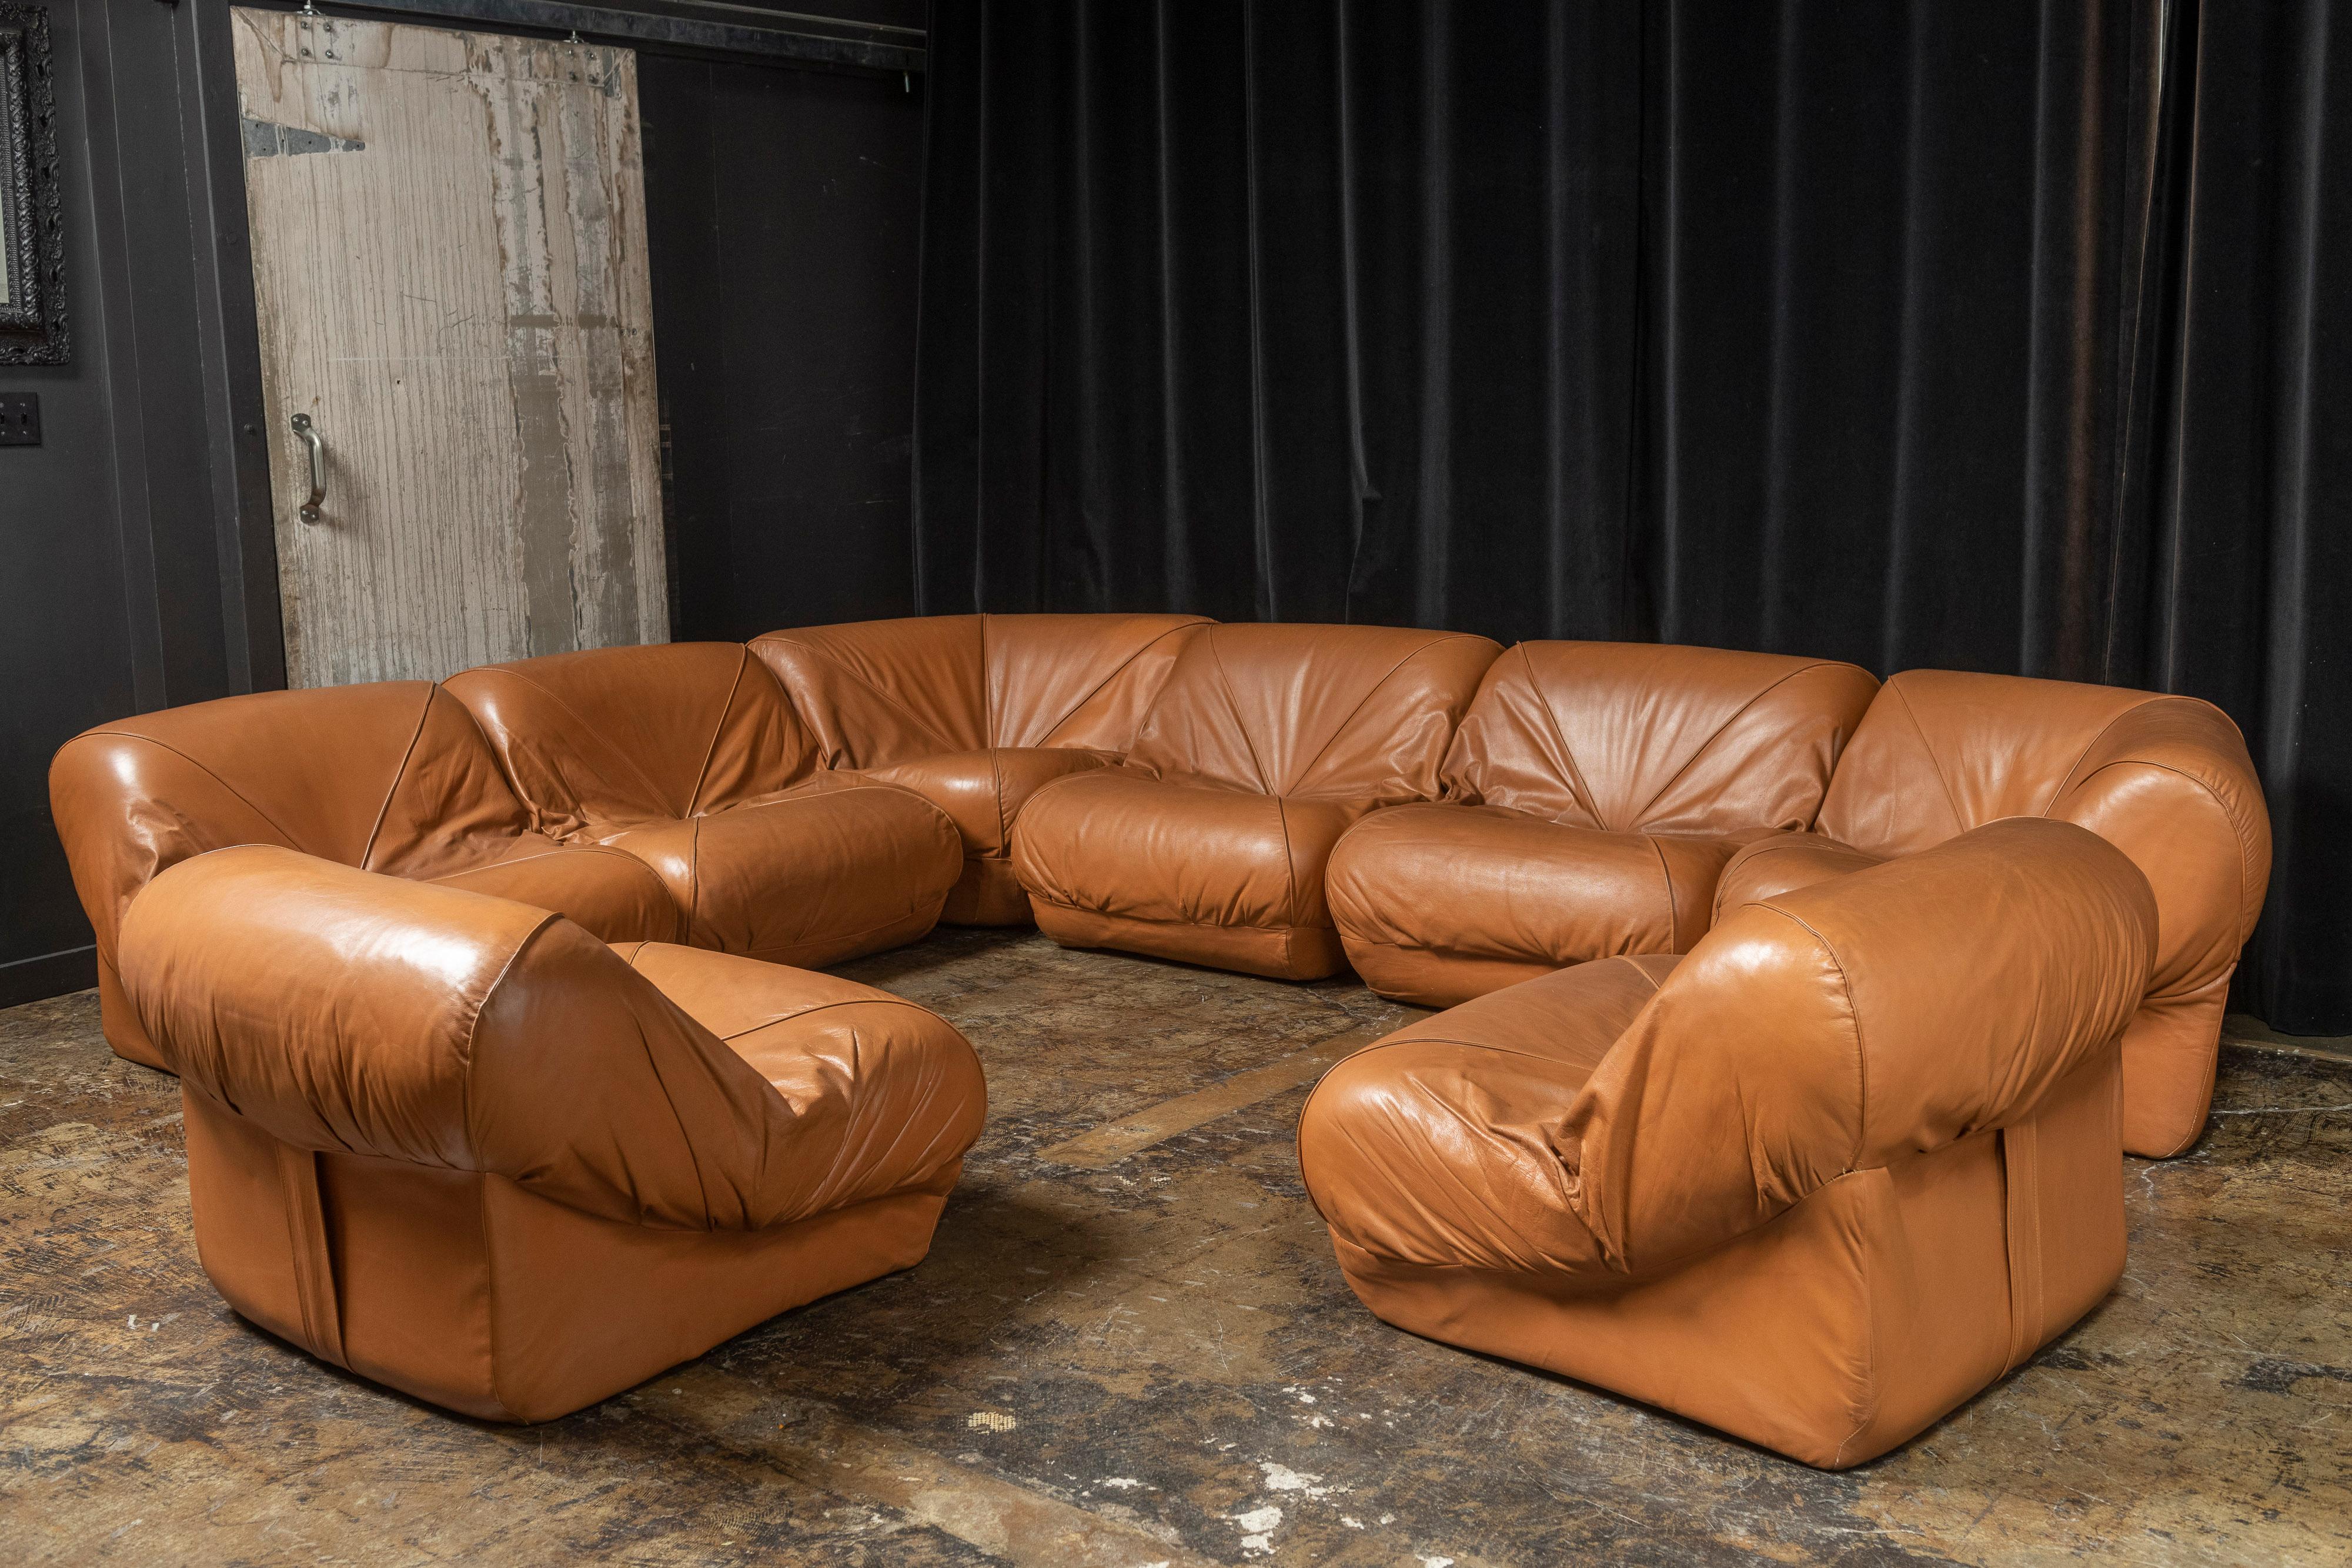 Amazing nine-piece sectional sofa by Jorge Zalszupin for L'Atelier. Seven of the pieces are similar shaped, much like slipper chairs on their own and two are triangularly-shaped, serving as a corner piece. Modular, the pieces together the sectional